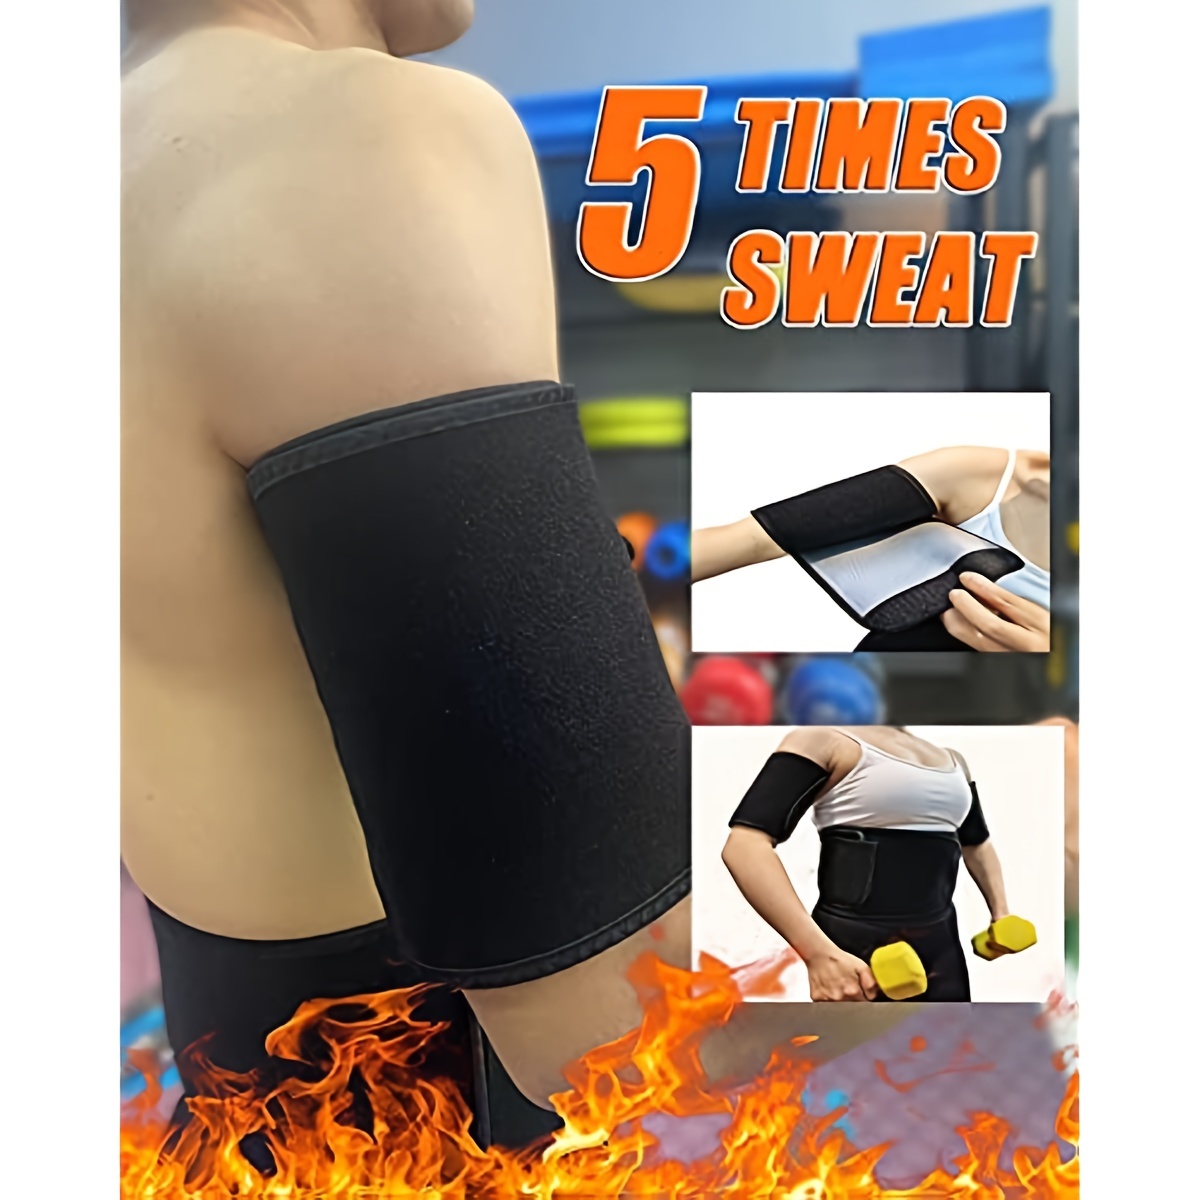 XINSHUN Sauna Arm Trimmer Bands Arm Sweat Bands for Women Weight Loss Arm Shaper Wraps for Workout Arm Bands for Flabby Arm